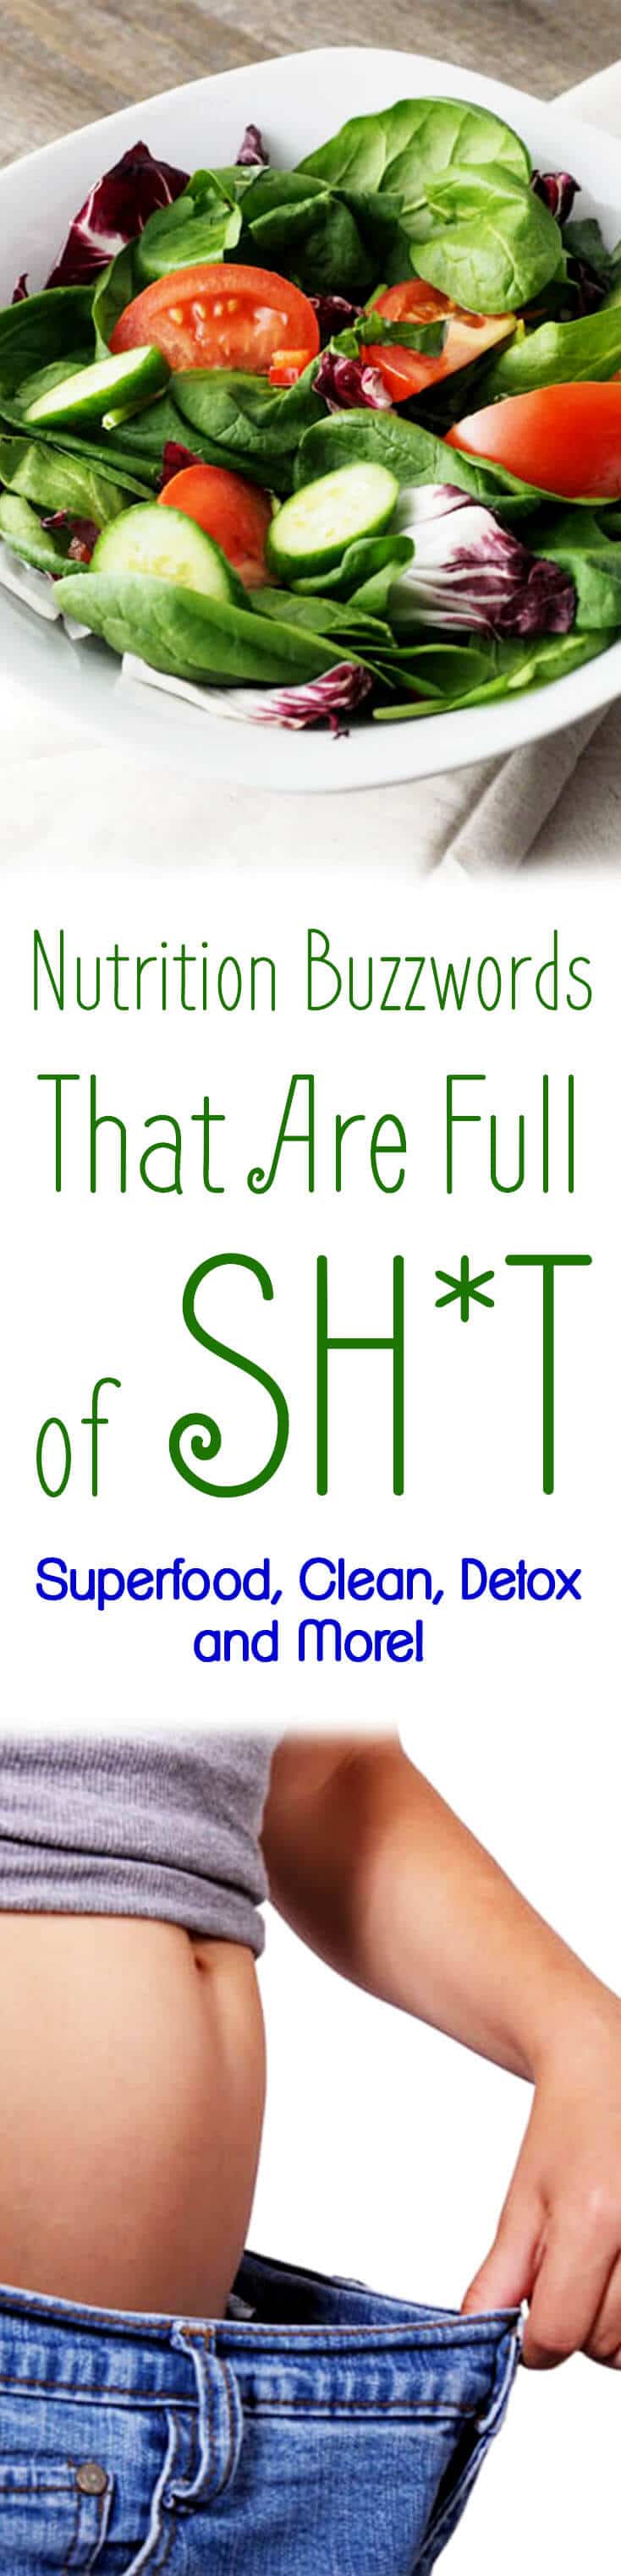 A pinterest image of salad and weight loss with the overlay text \"Nutrition Buzzwords That Are Full of Sh*t Superfood, Clean, Detox and More!\"